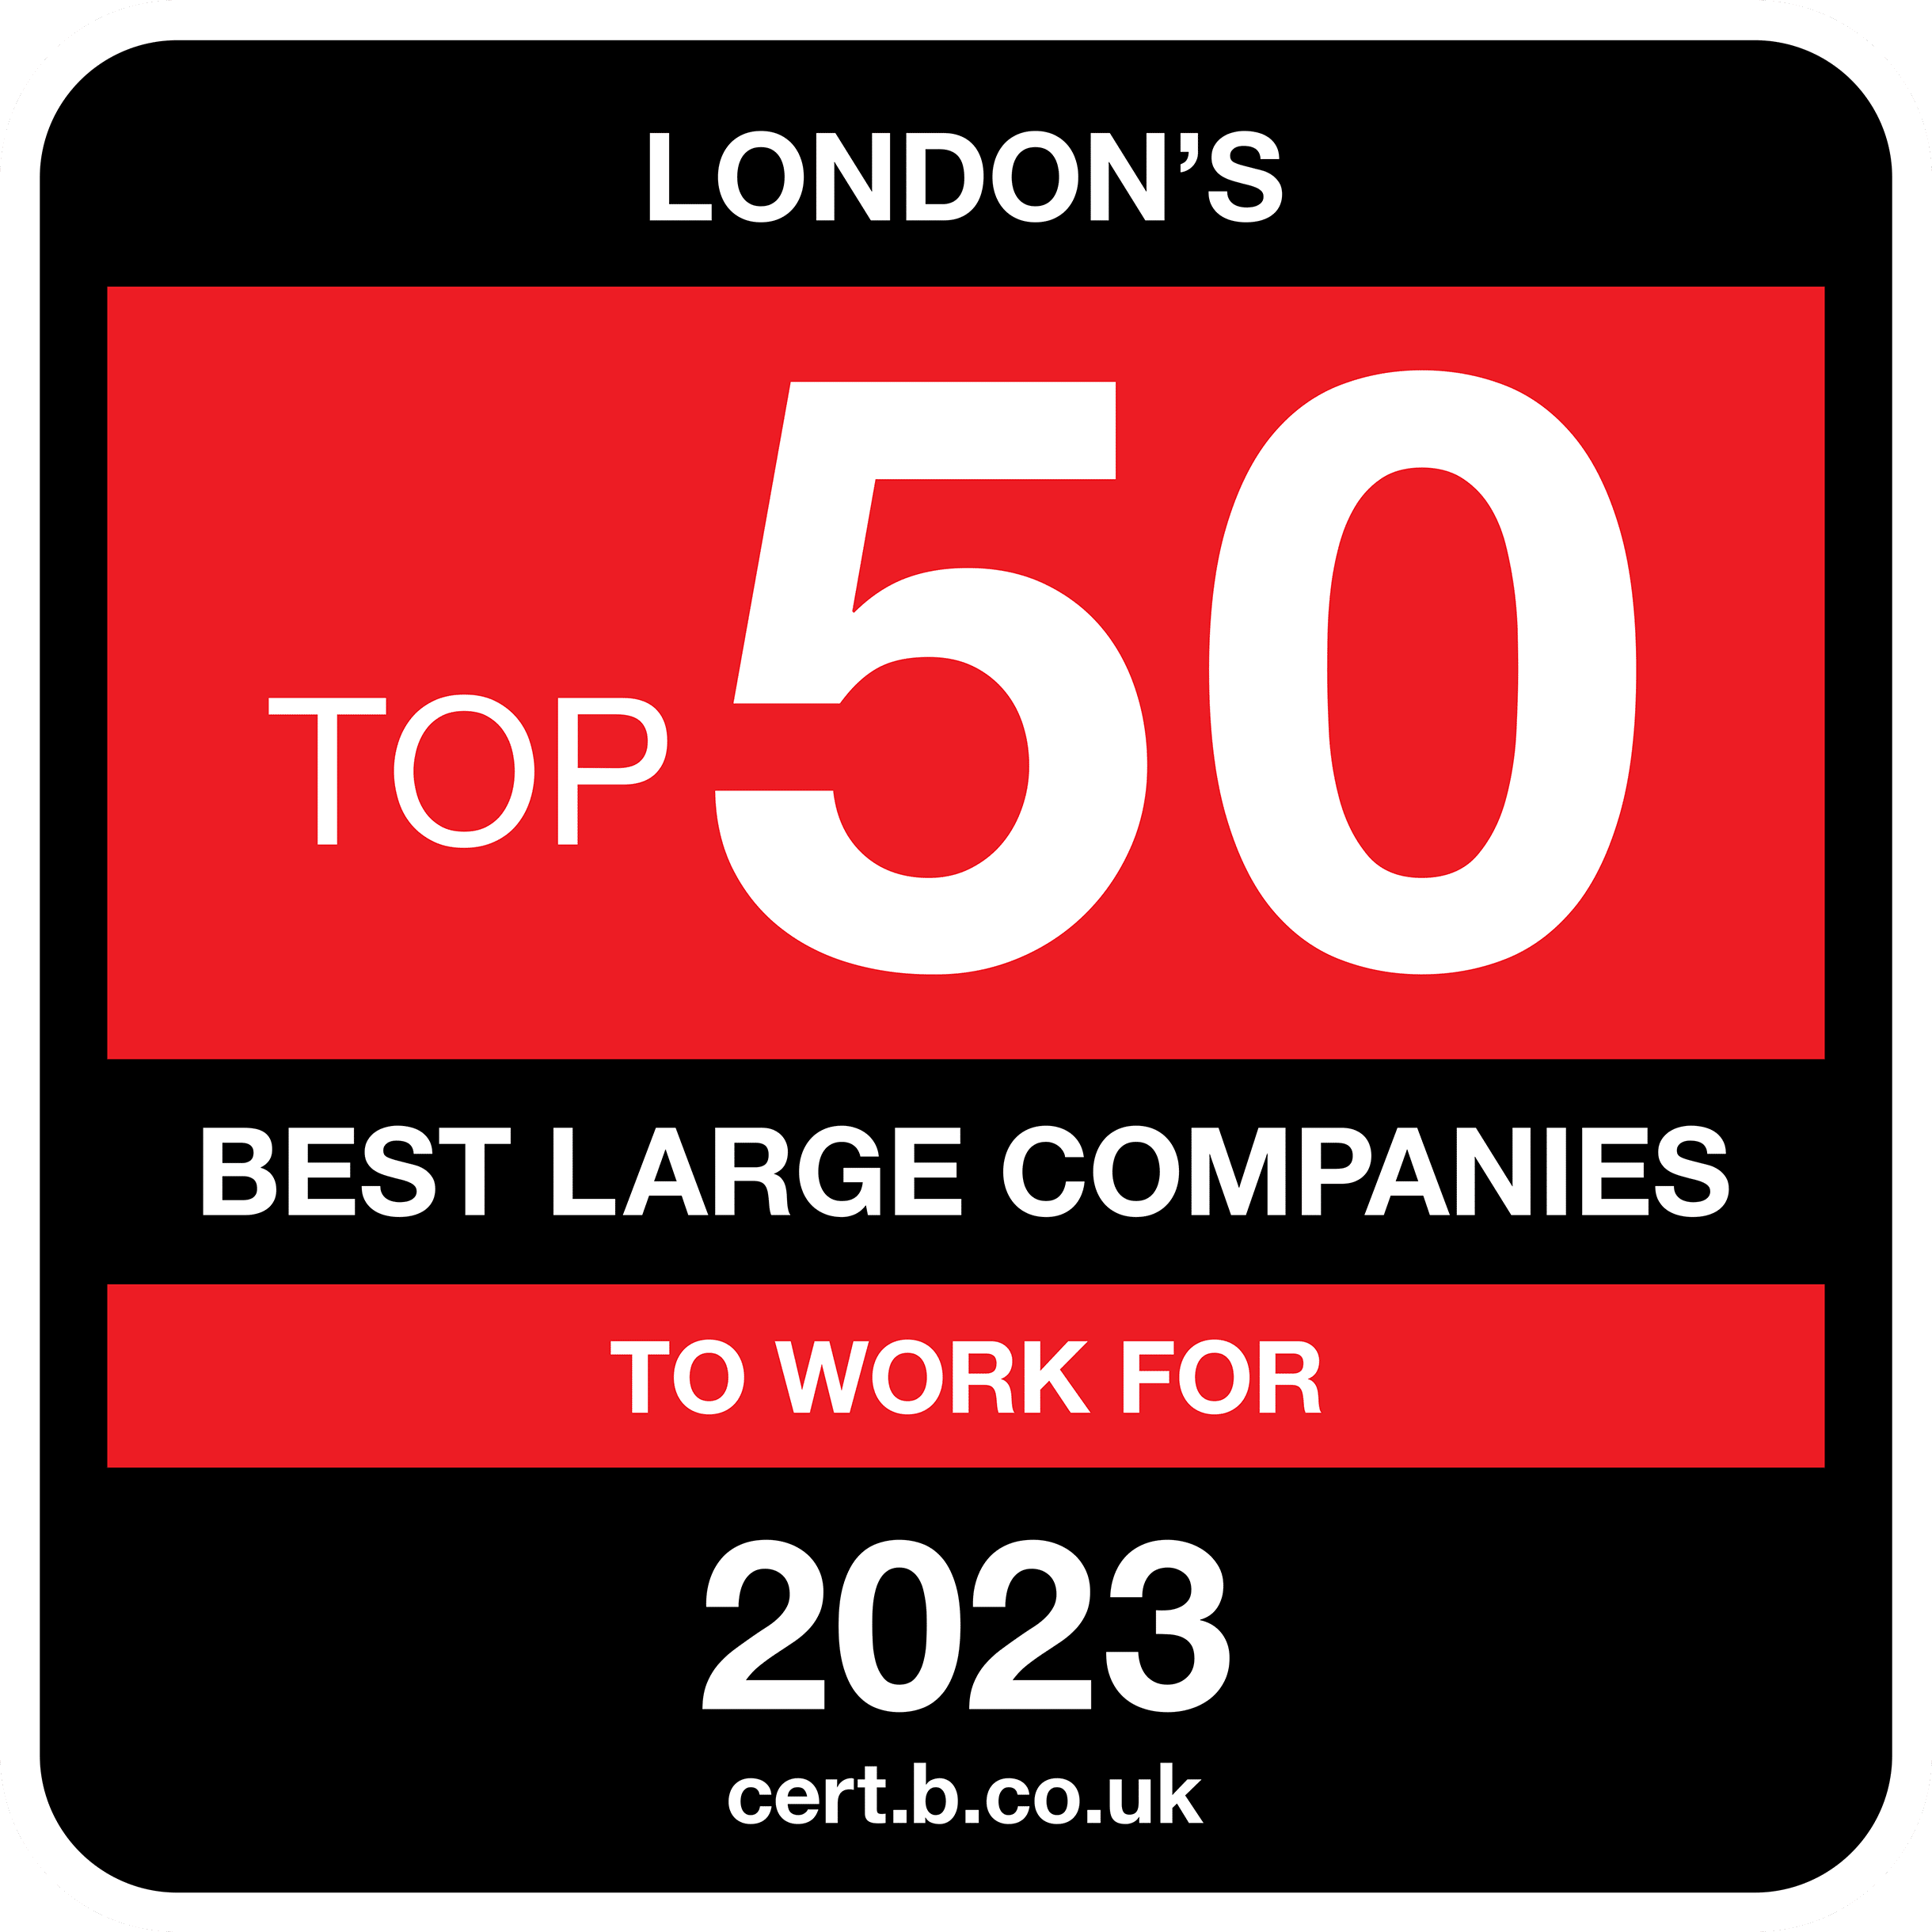 London's Top 50 Best Companies to work for 2023